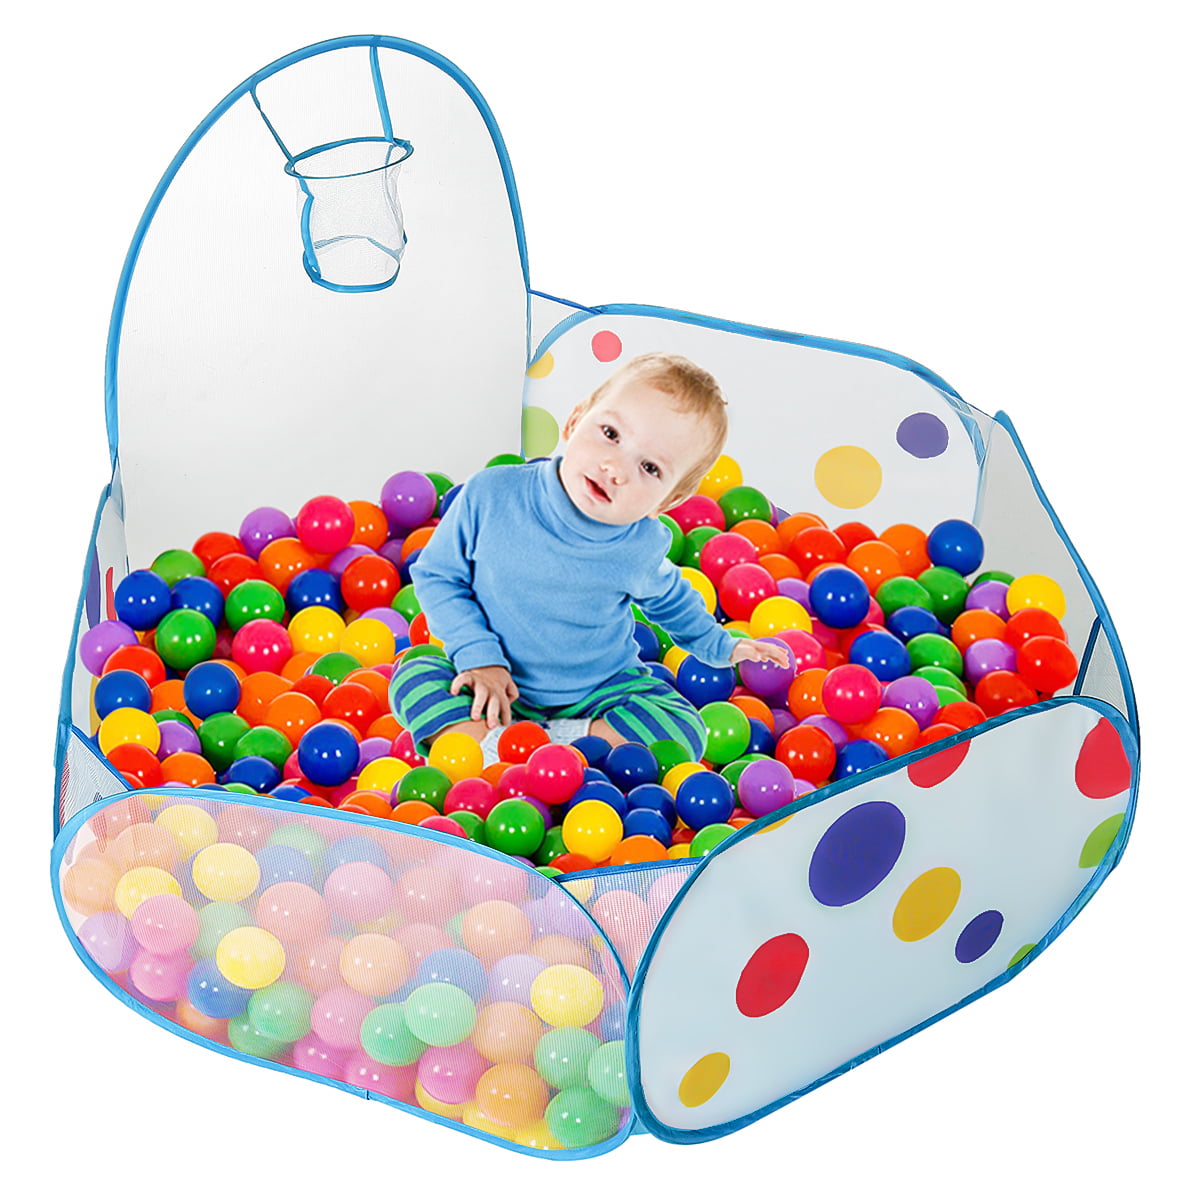 Children Kids Baby Portable Ball Pit Pool Play Tent Indoor Outdoor Game Toy Gift 